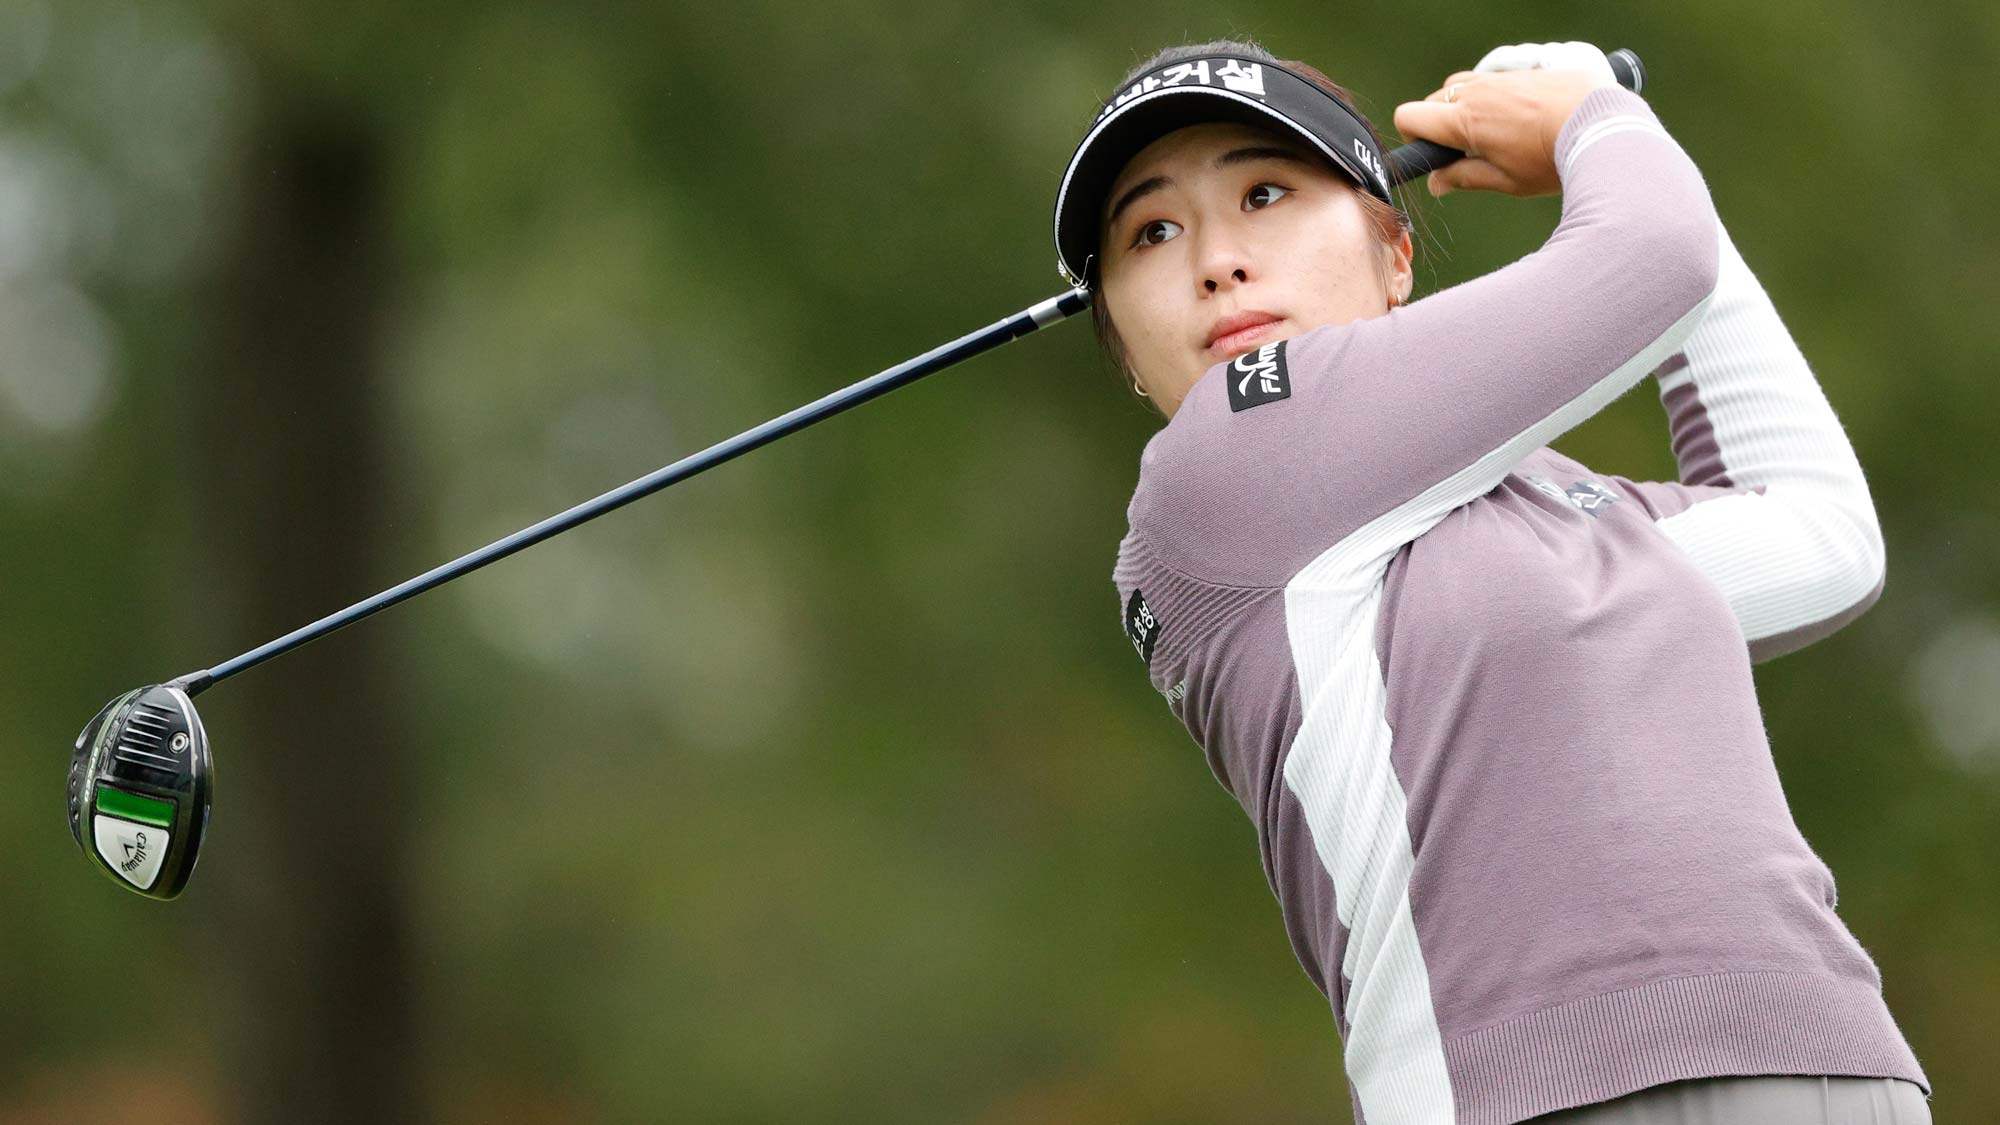 Jeongeun Lee6 of Korea hits their tee shot on the 2nd hole during the final round of the Cognizant Founders Cup